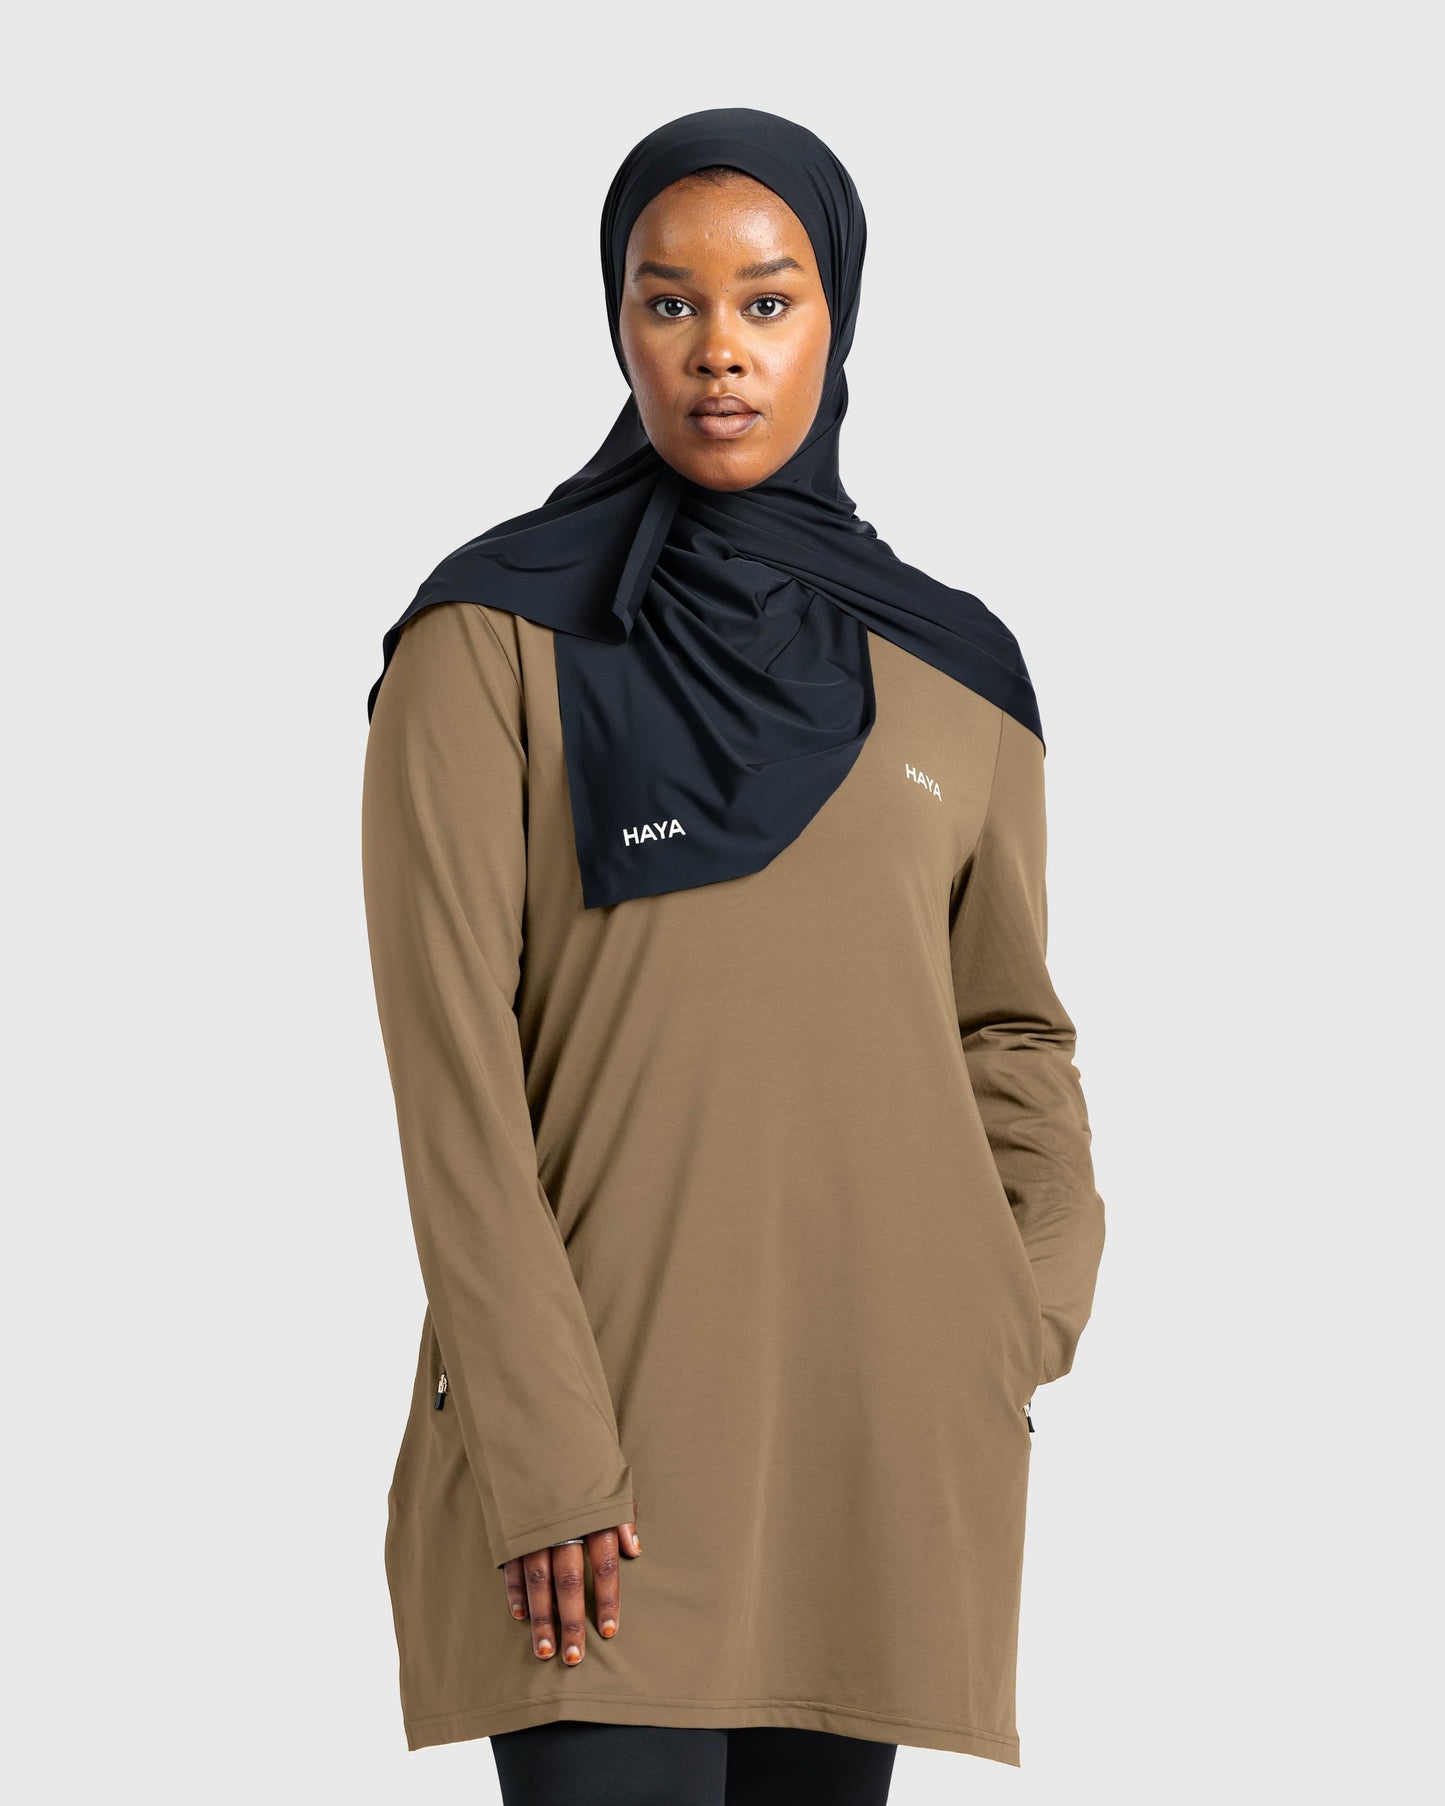 Essential Training Top - Camel Brown